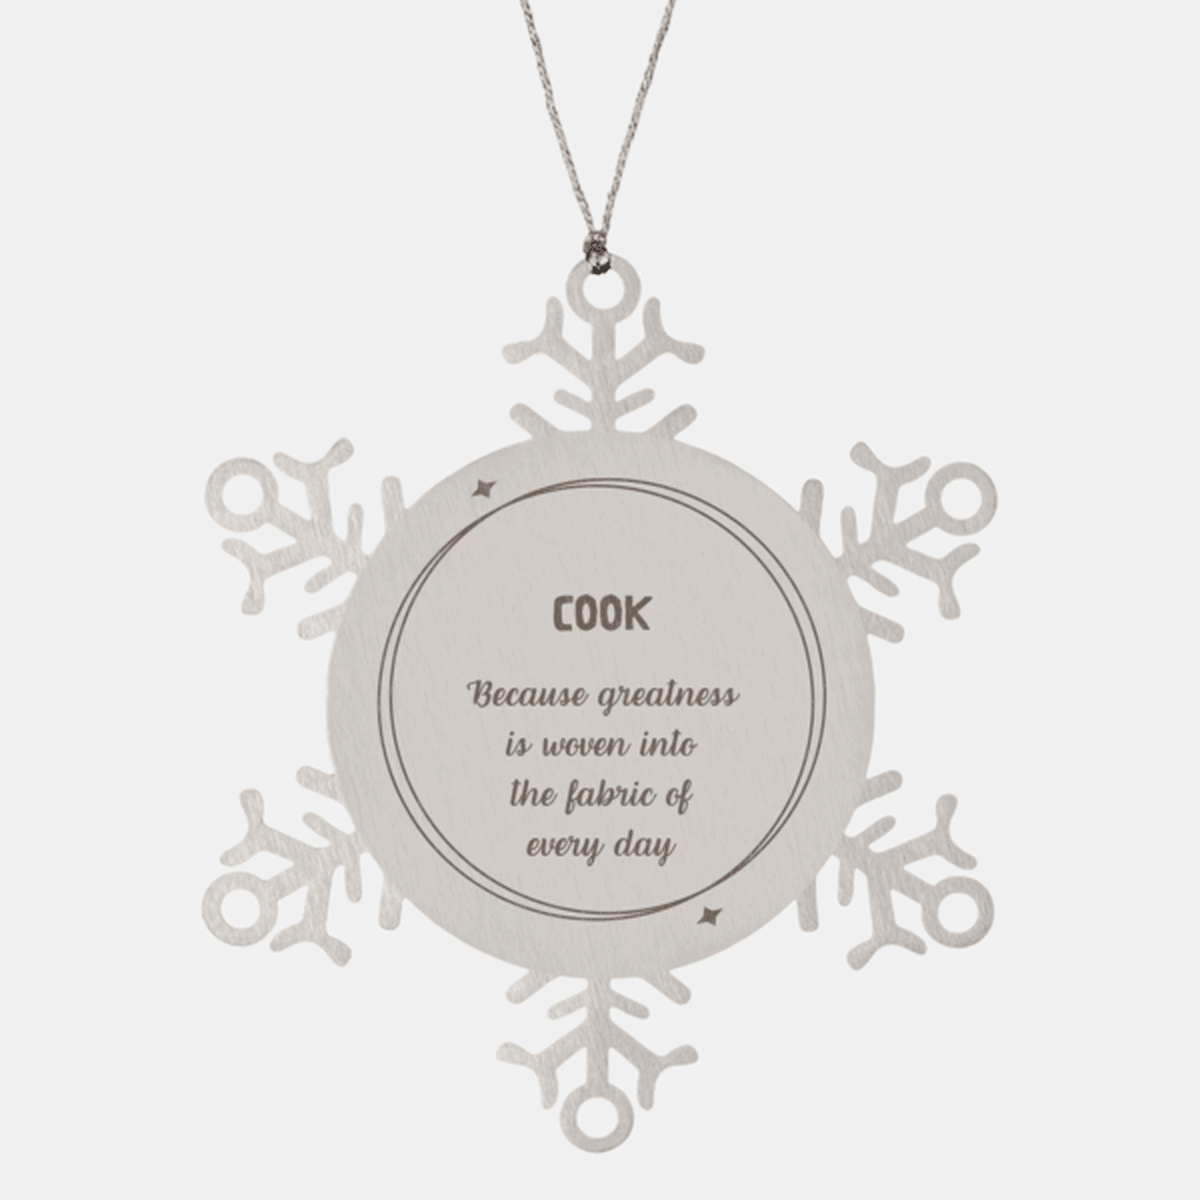 Sarcastic Cook Snowflake Ornament Gifts, Christmas Holiday Gifts for Cook Ornament, Cook: Because greatness is woven into the fabric of every day, Coworkers, Friends - Mallard Moon Gift Shop